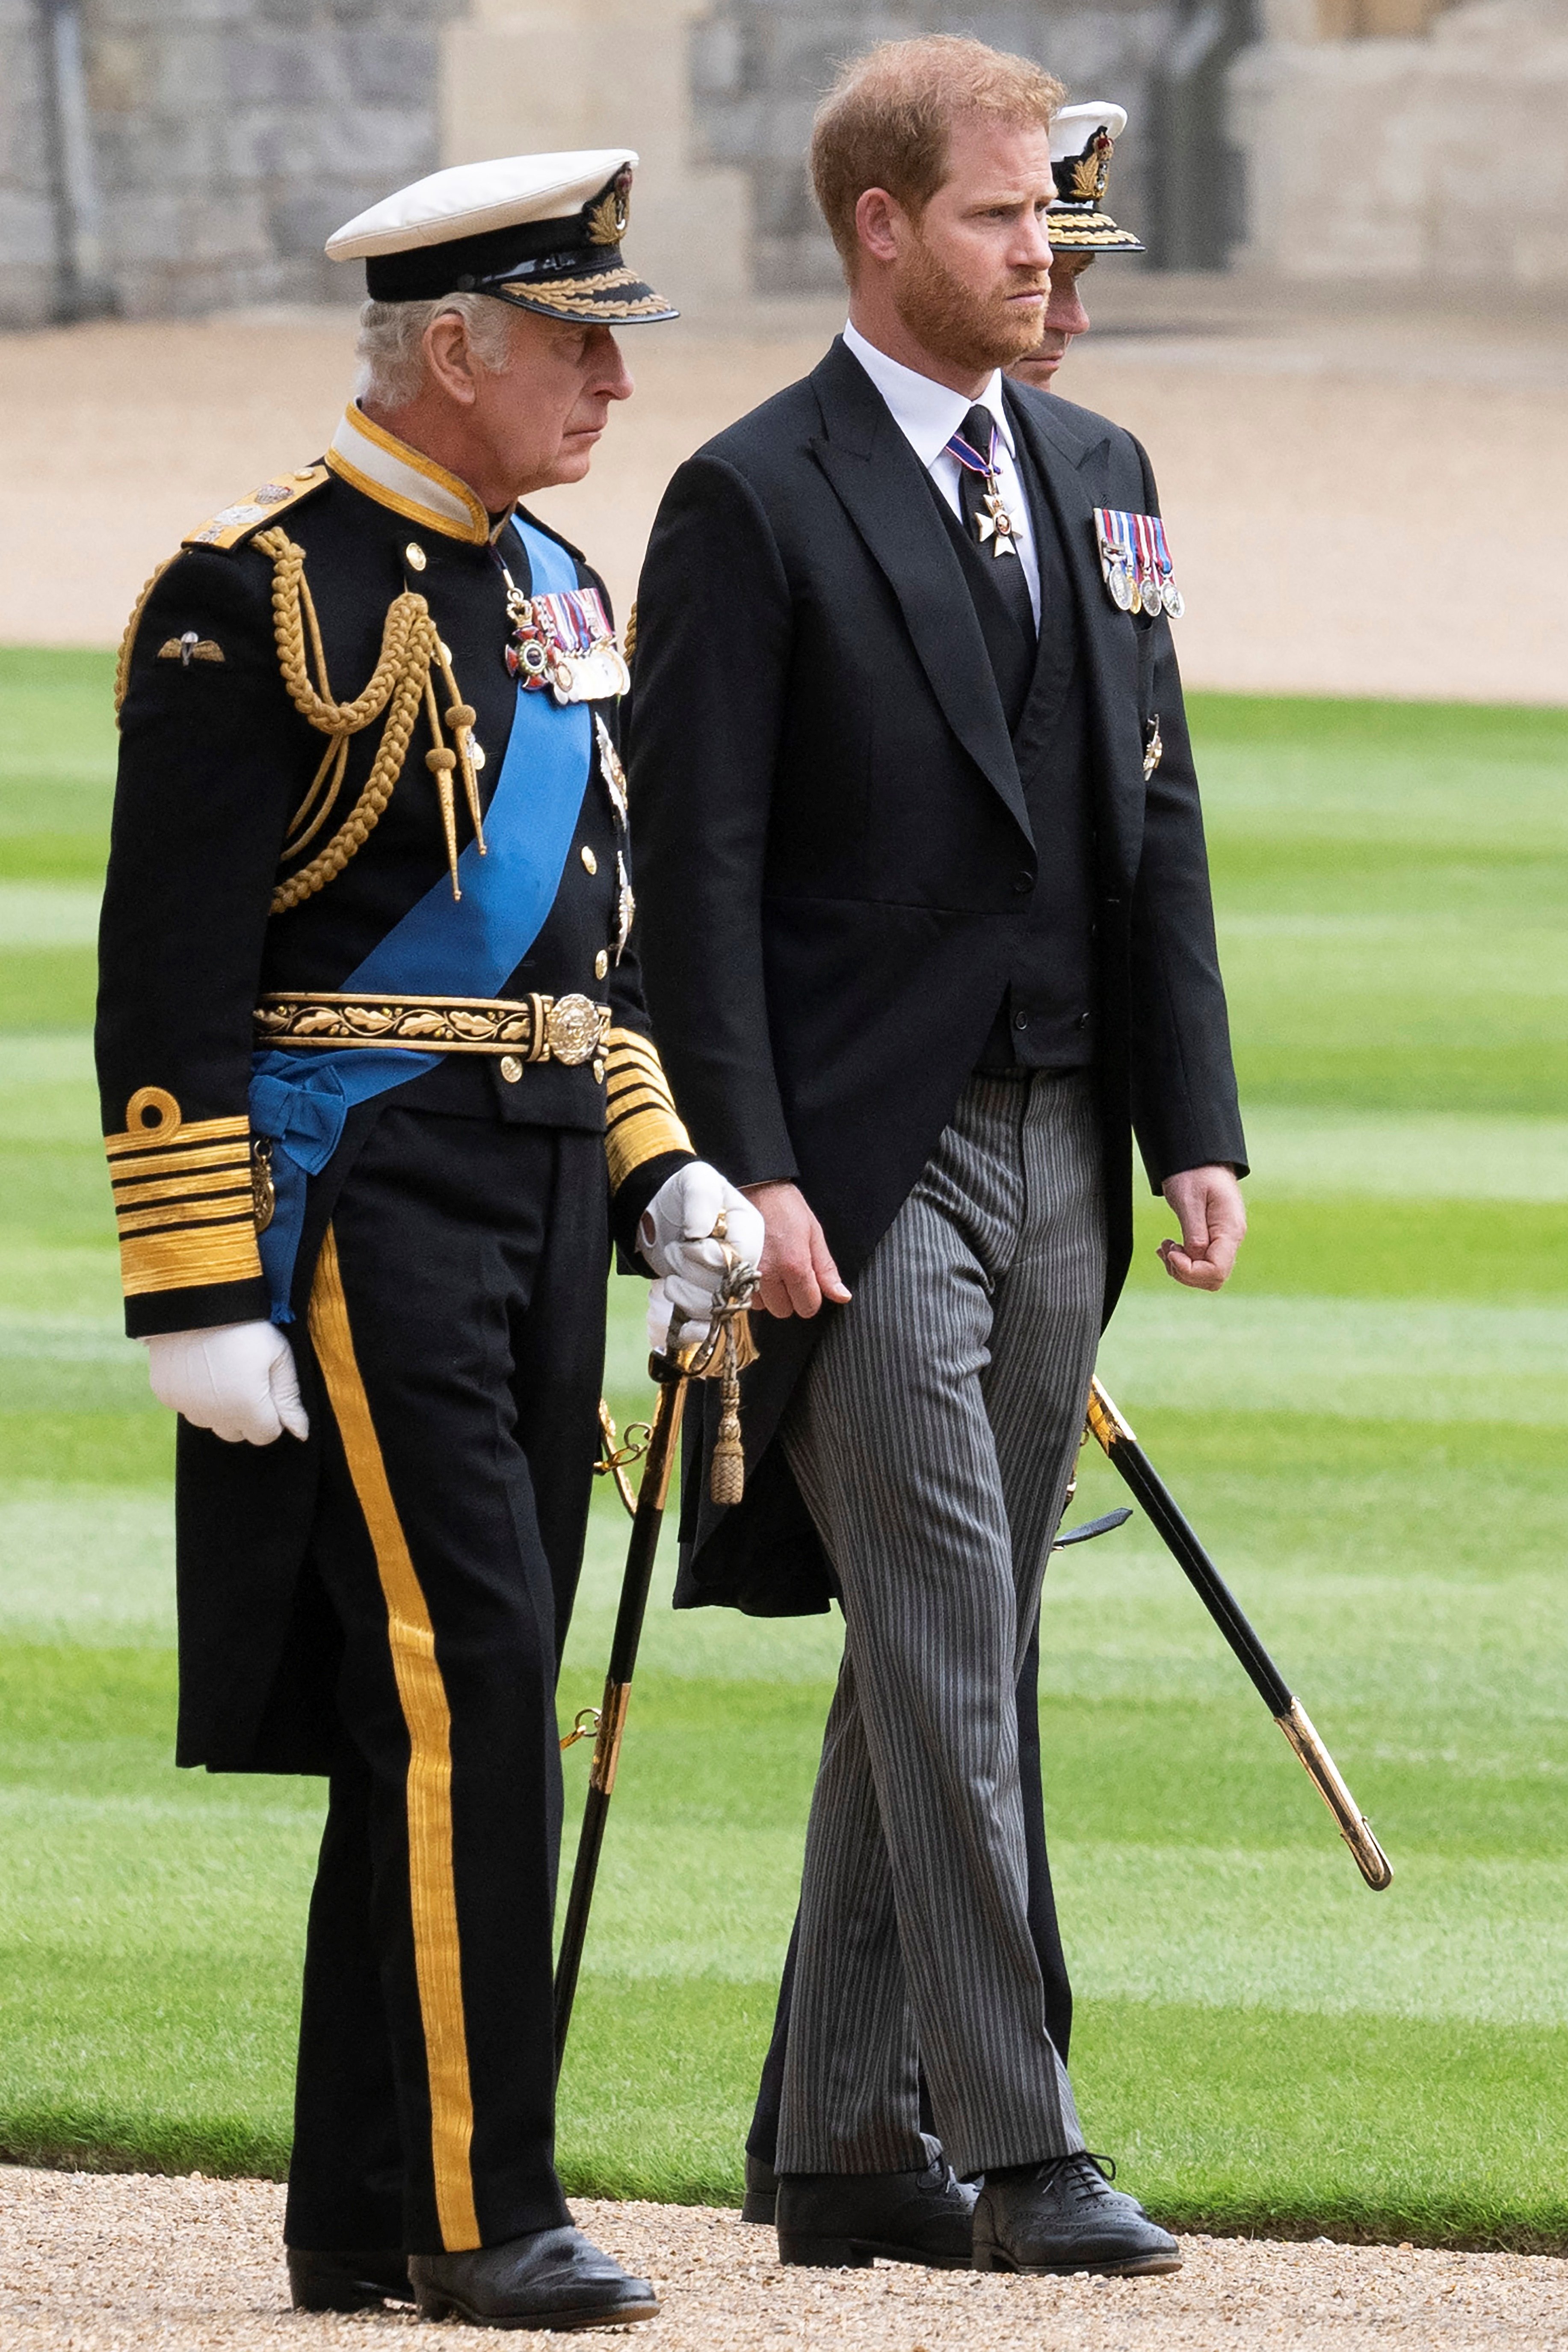 Britain's King Charles III (L) walks with his son Britain's Prince Harry, Duke of Sussex as they arrive at St George's Chapel inside Windsor Castle on September 19, 2022 | Source: Getty Images